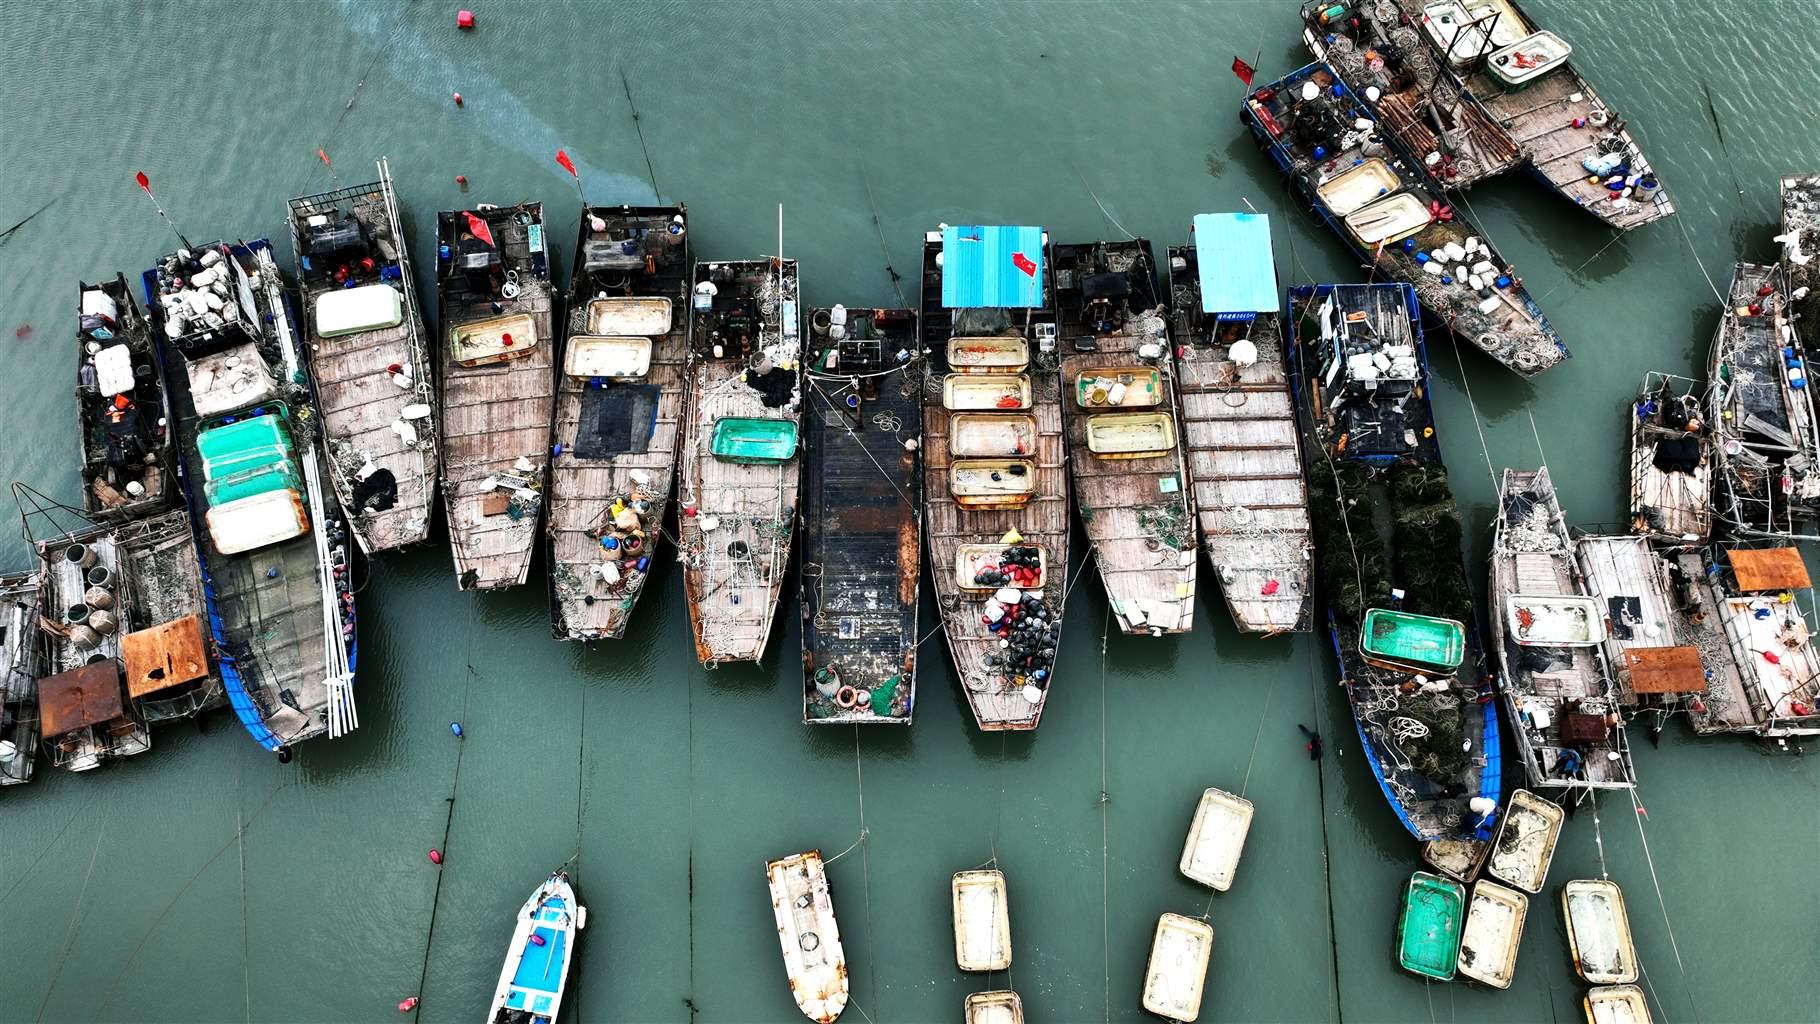 Nearly 20 small fishing boats, moored in gray-green water in a harbor near the Liandao Central Fishing Port in China, are viewed from above. The boats’ mostly gray decks hold boxes for the catch and have hulls in many colors and long anchor lines with blue, red and white buoys tying them to the dock, which is out of the frame.